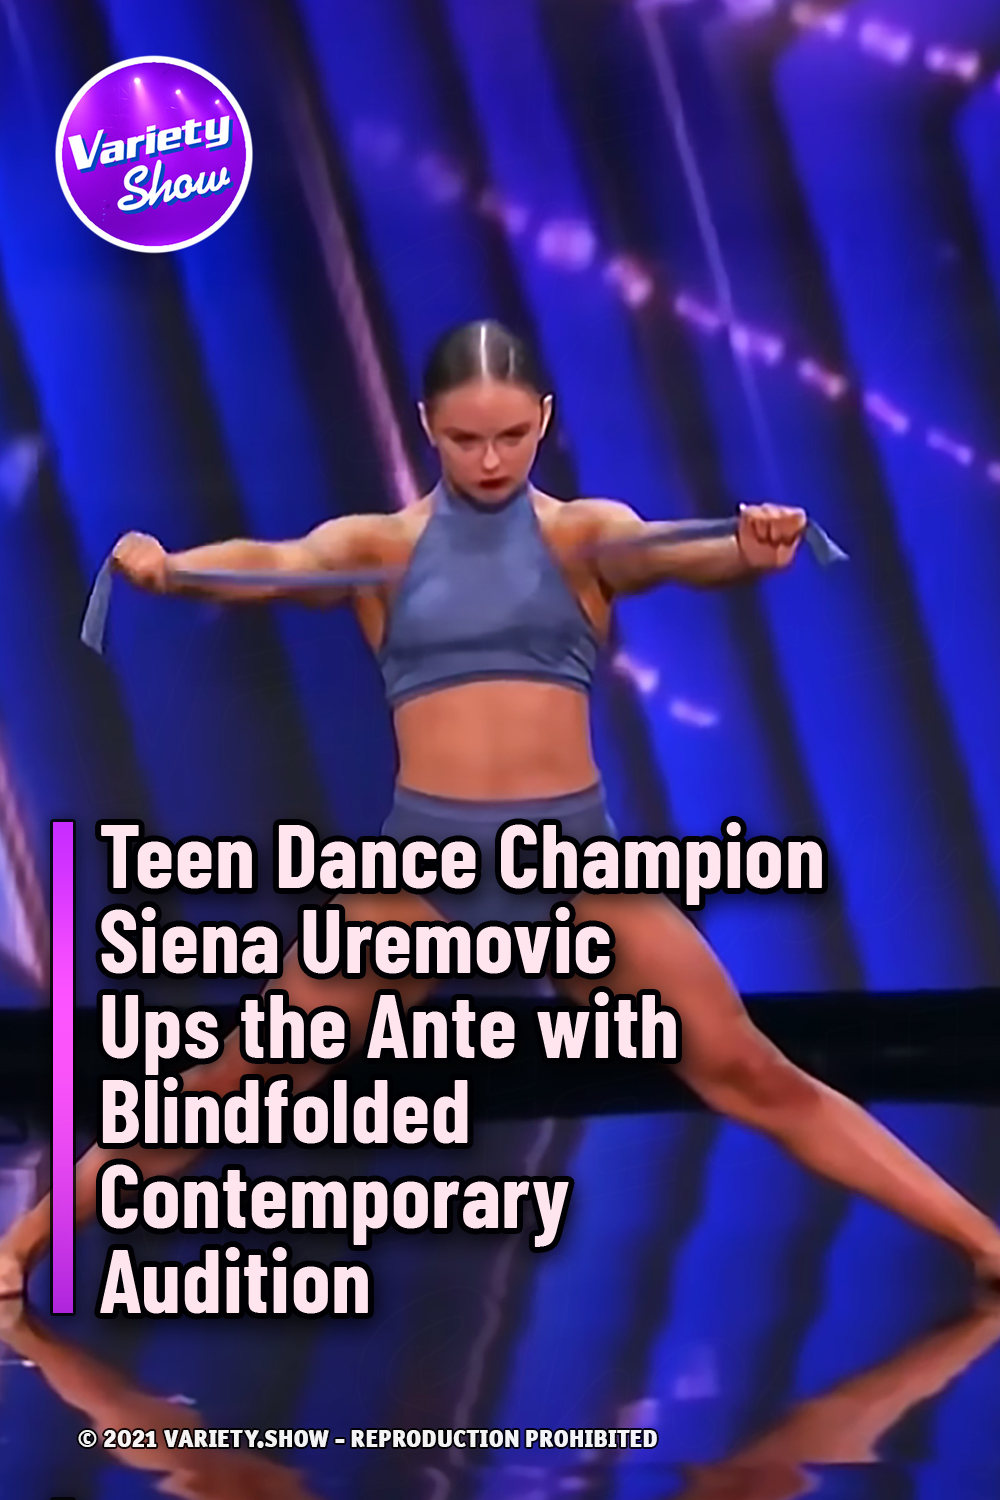 Teen Dance Champion Siena Uremovic Ups the Ante with Blindfolded Contemporary Audition